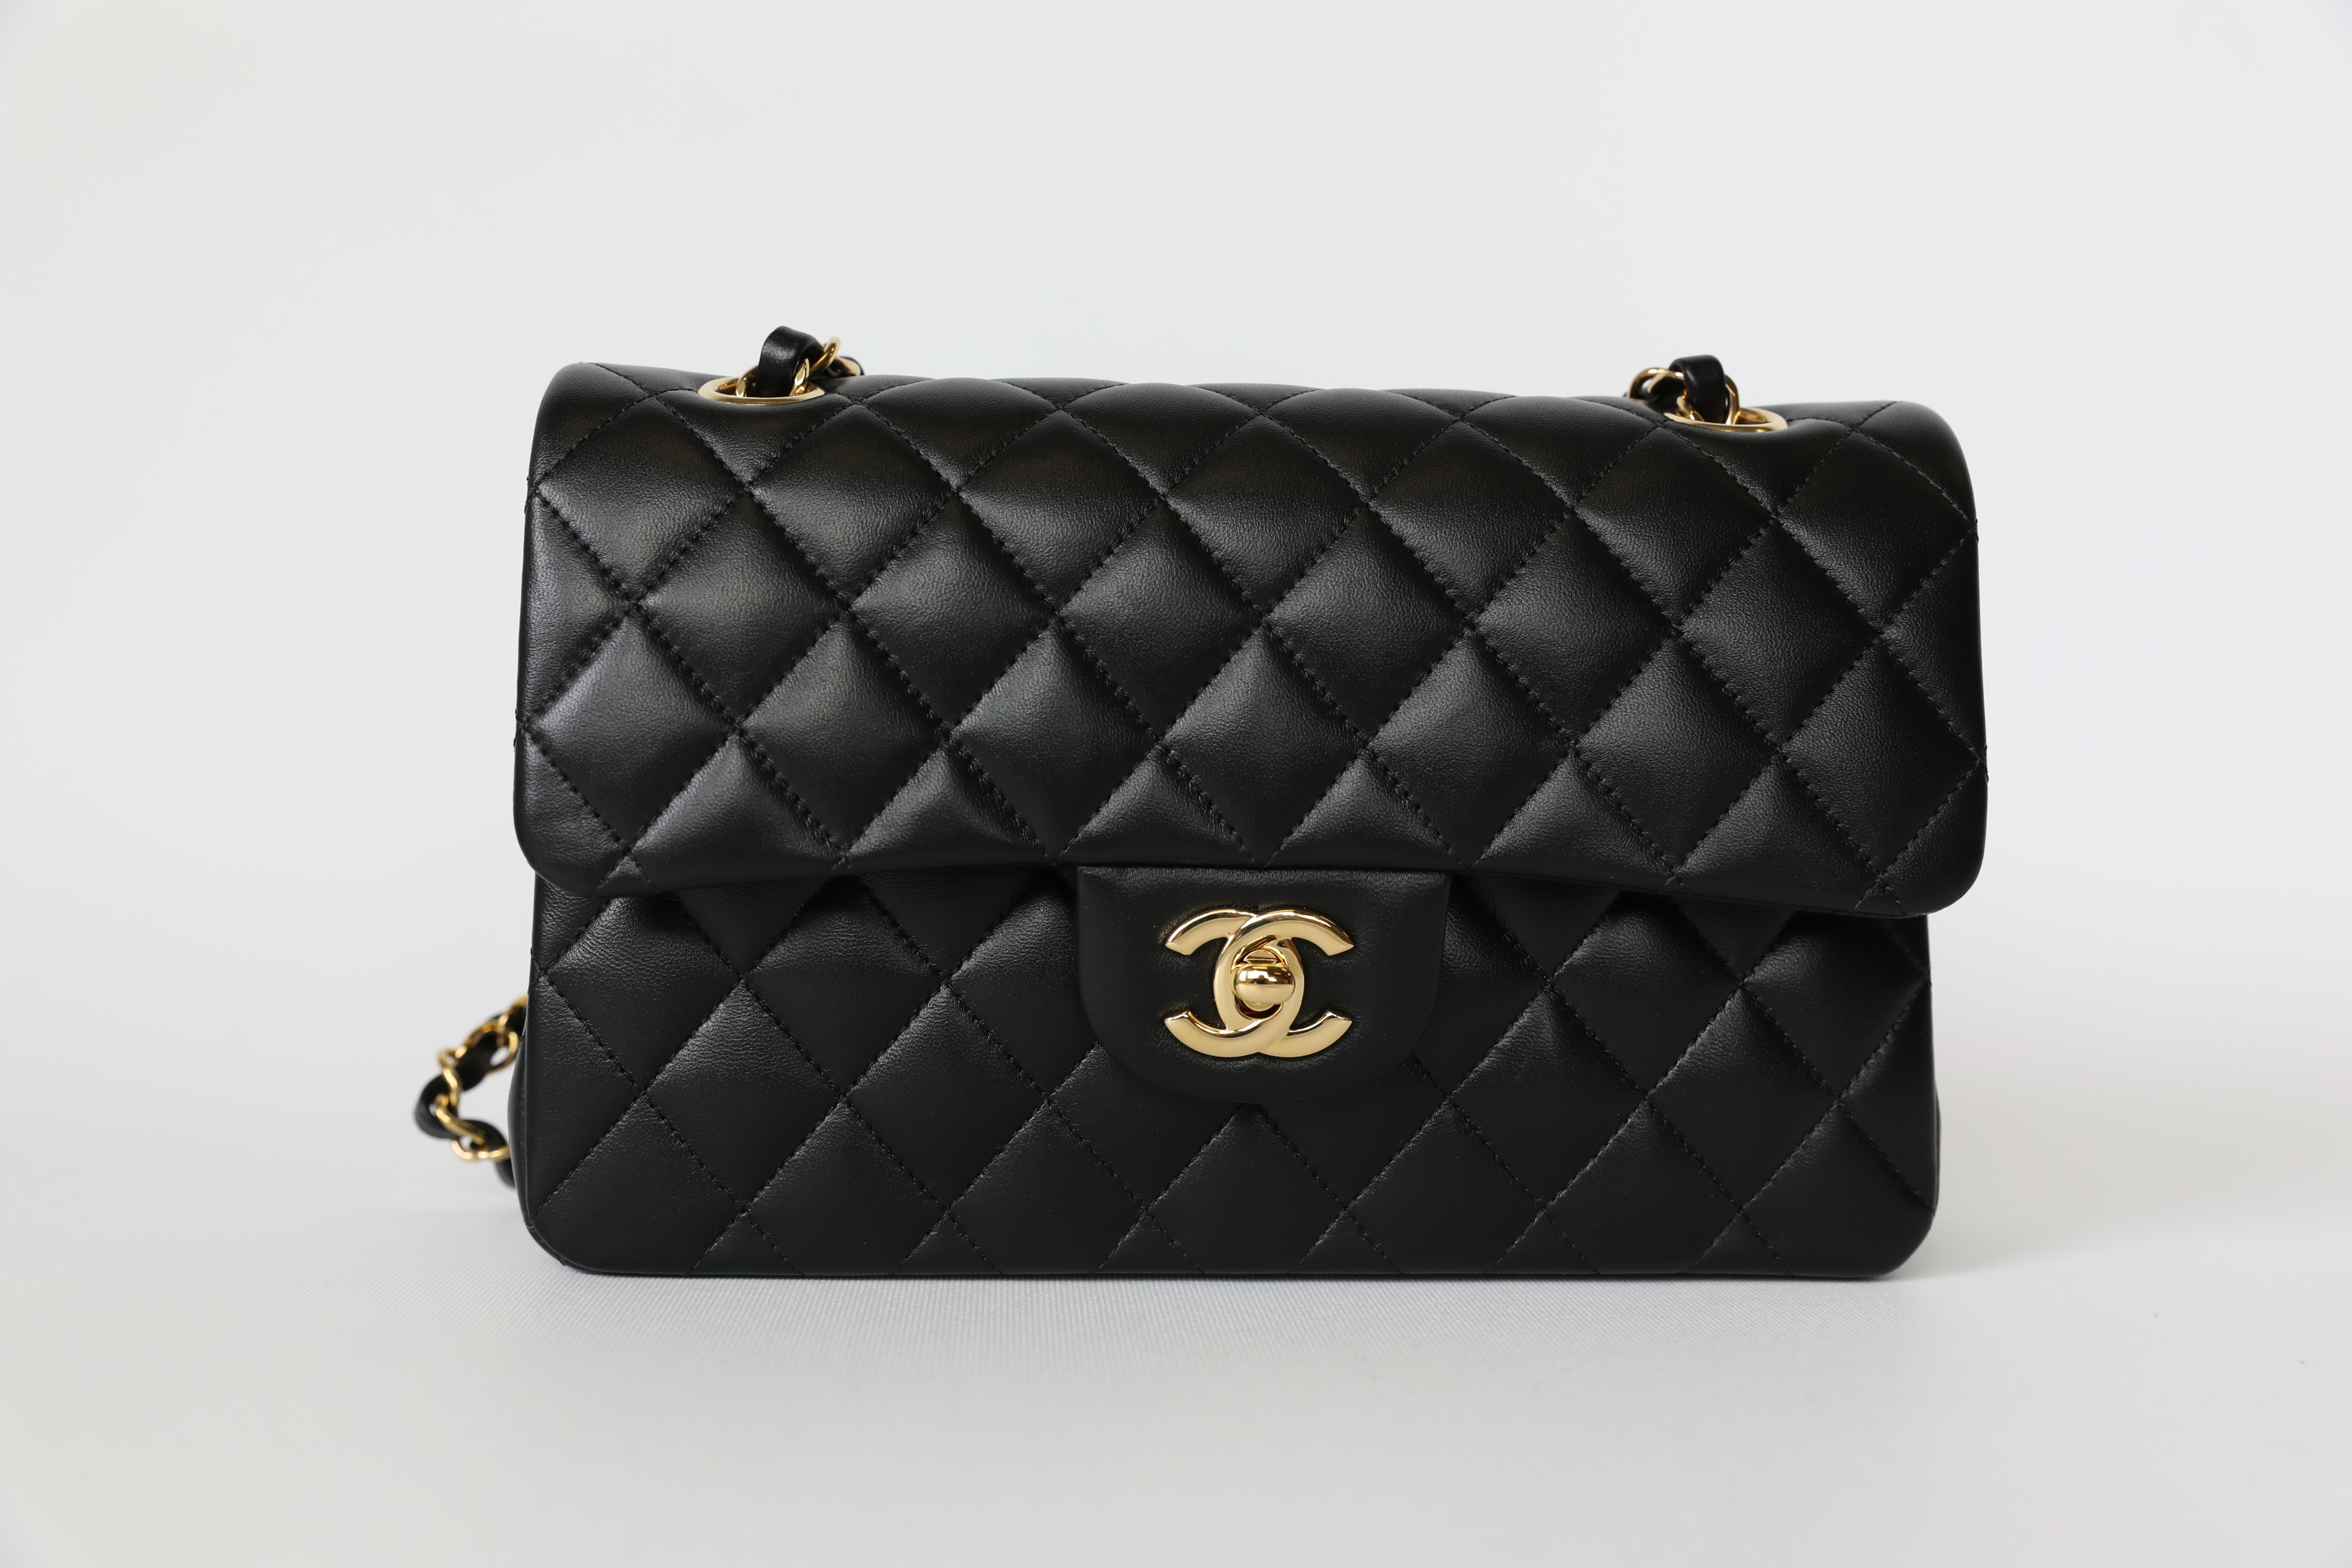 Chanel Classic Small, Black Lambskin with Gold Hardware, Preowned